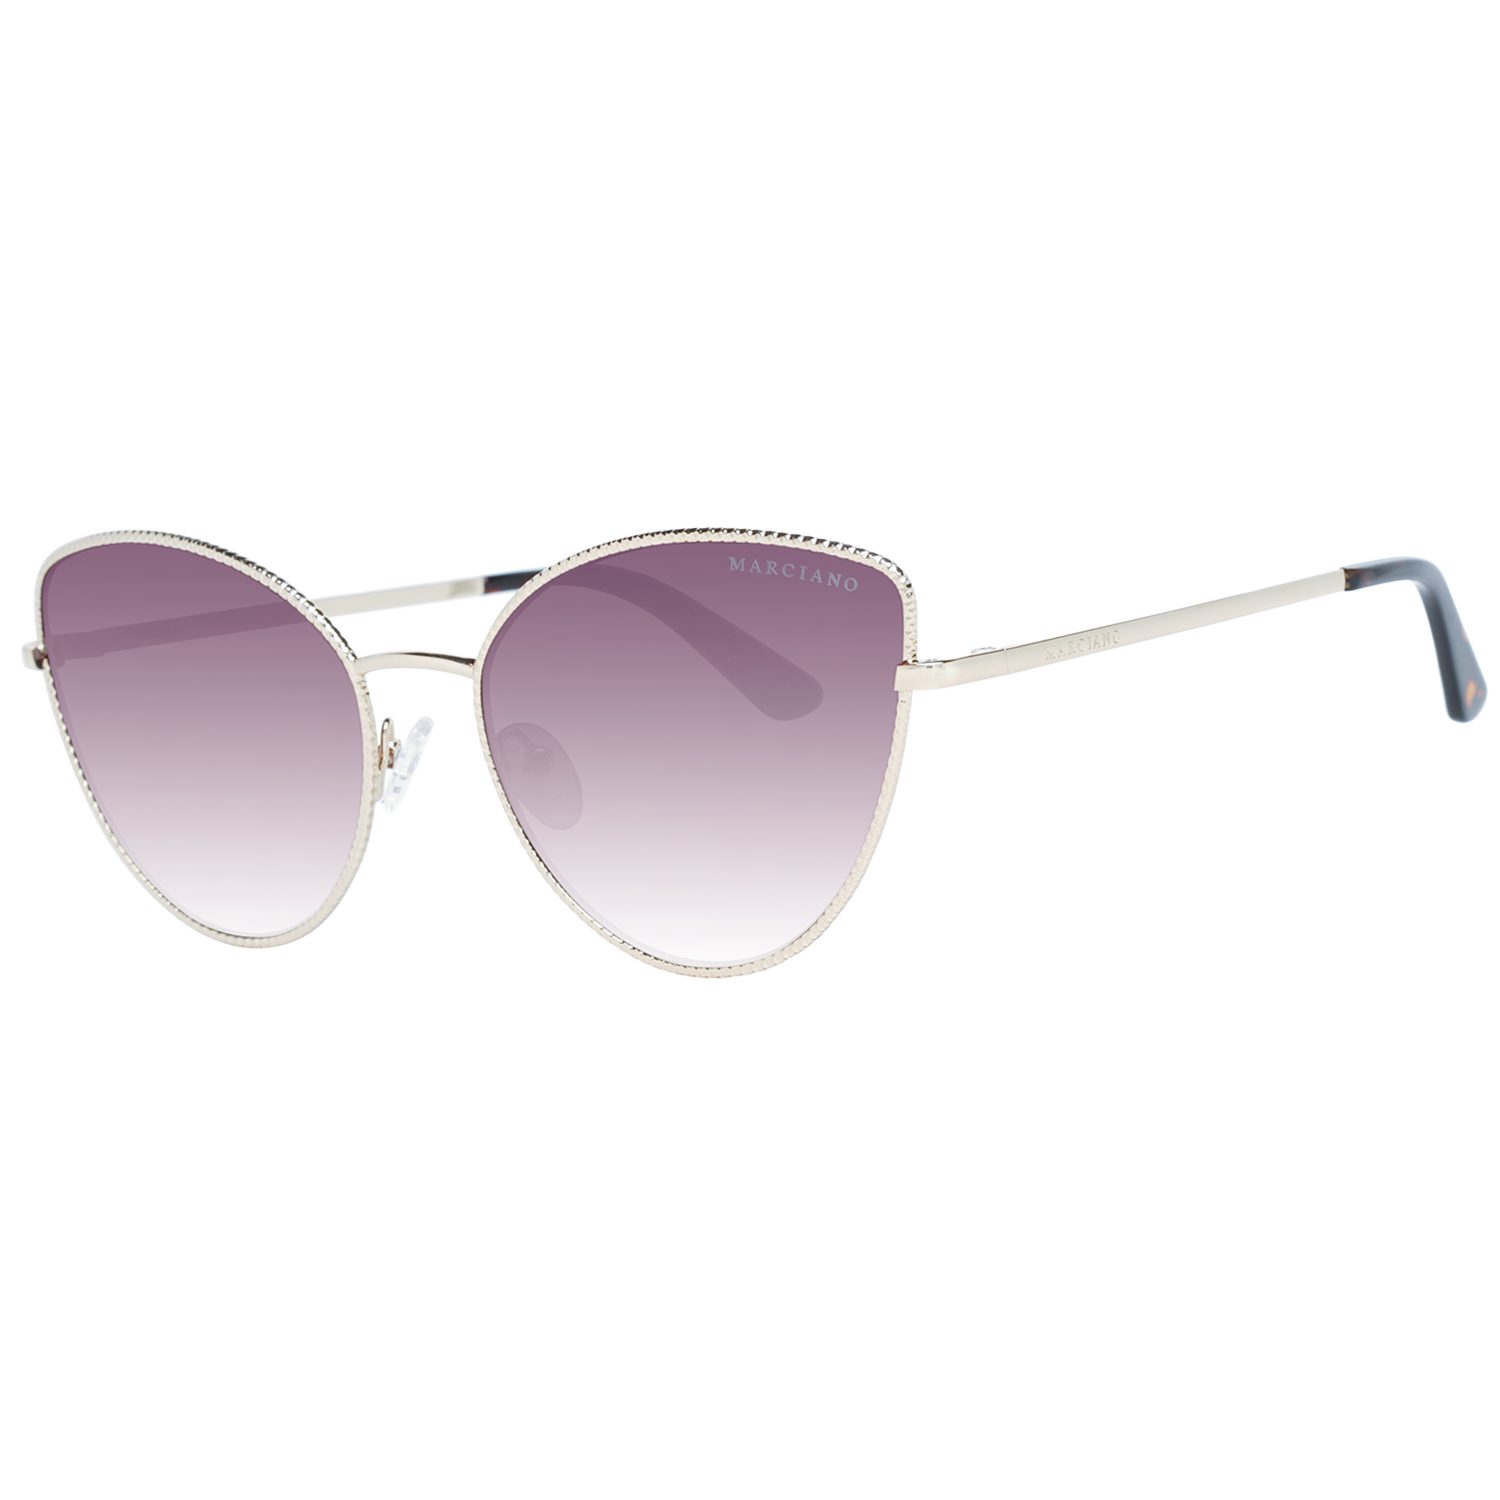 Marciano Sonnenbrille by Guess